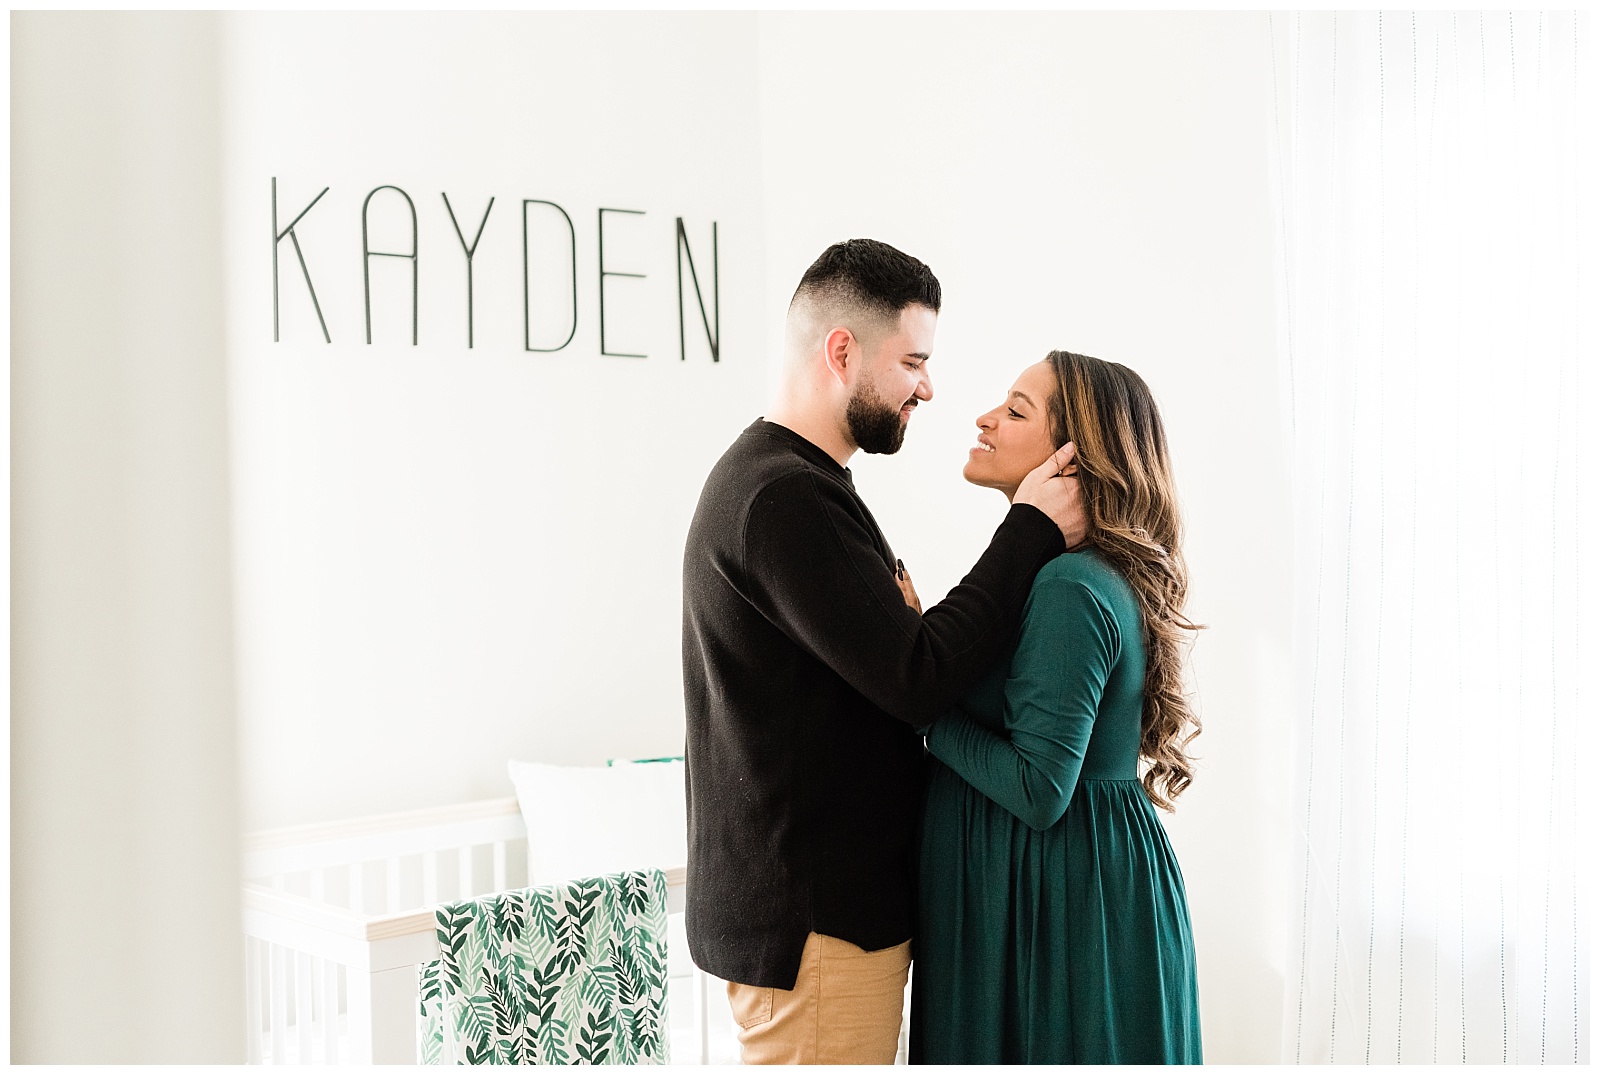 In Home Maternity Session, Nursery, Baby, New Parents, Maternity Shoot, Pregnant, Pregnancy Photos, New Jersey, Photographer, Baby Boy, Jungle Nursery, Photo